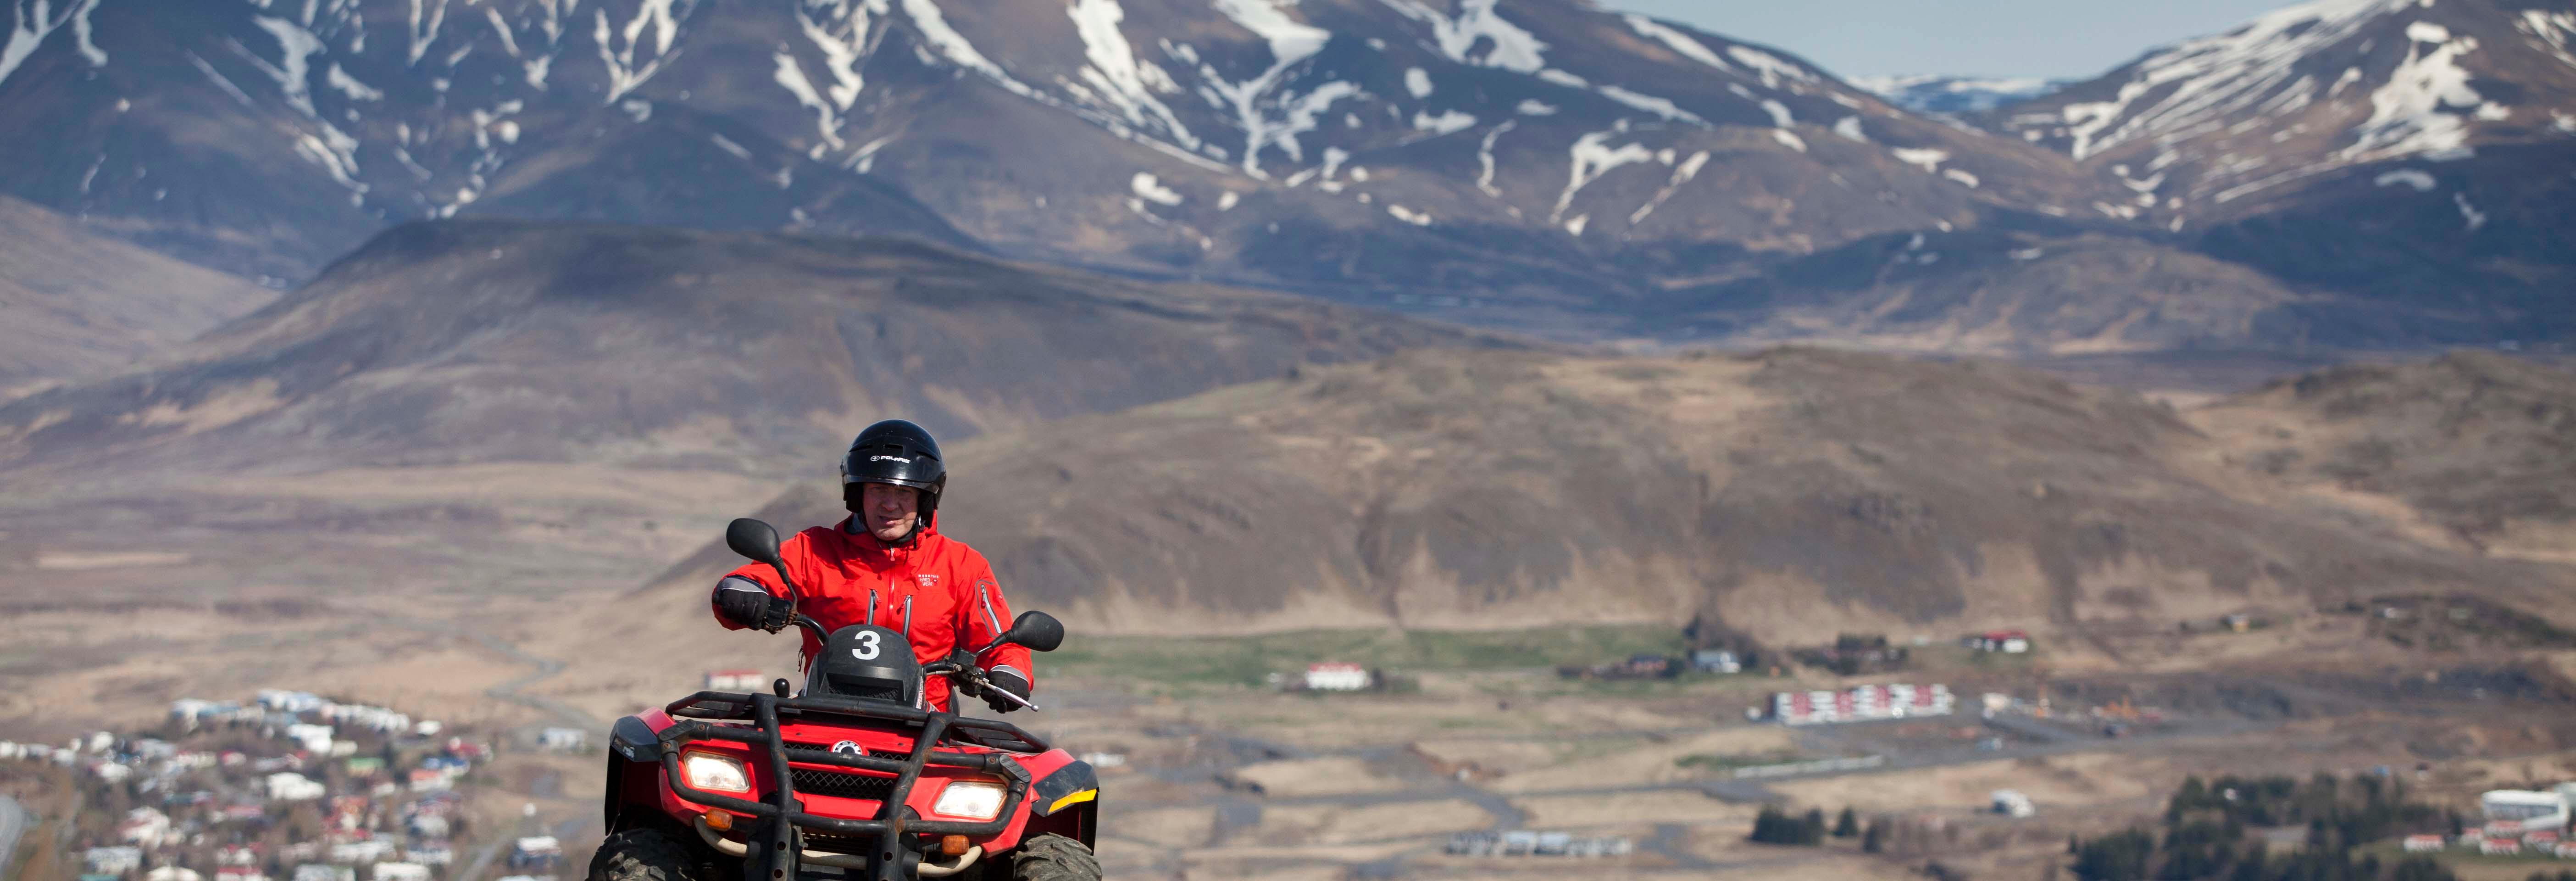 Quad bike ride in the mountains of Iceland - departure from your hotel in Reykjavik